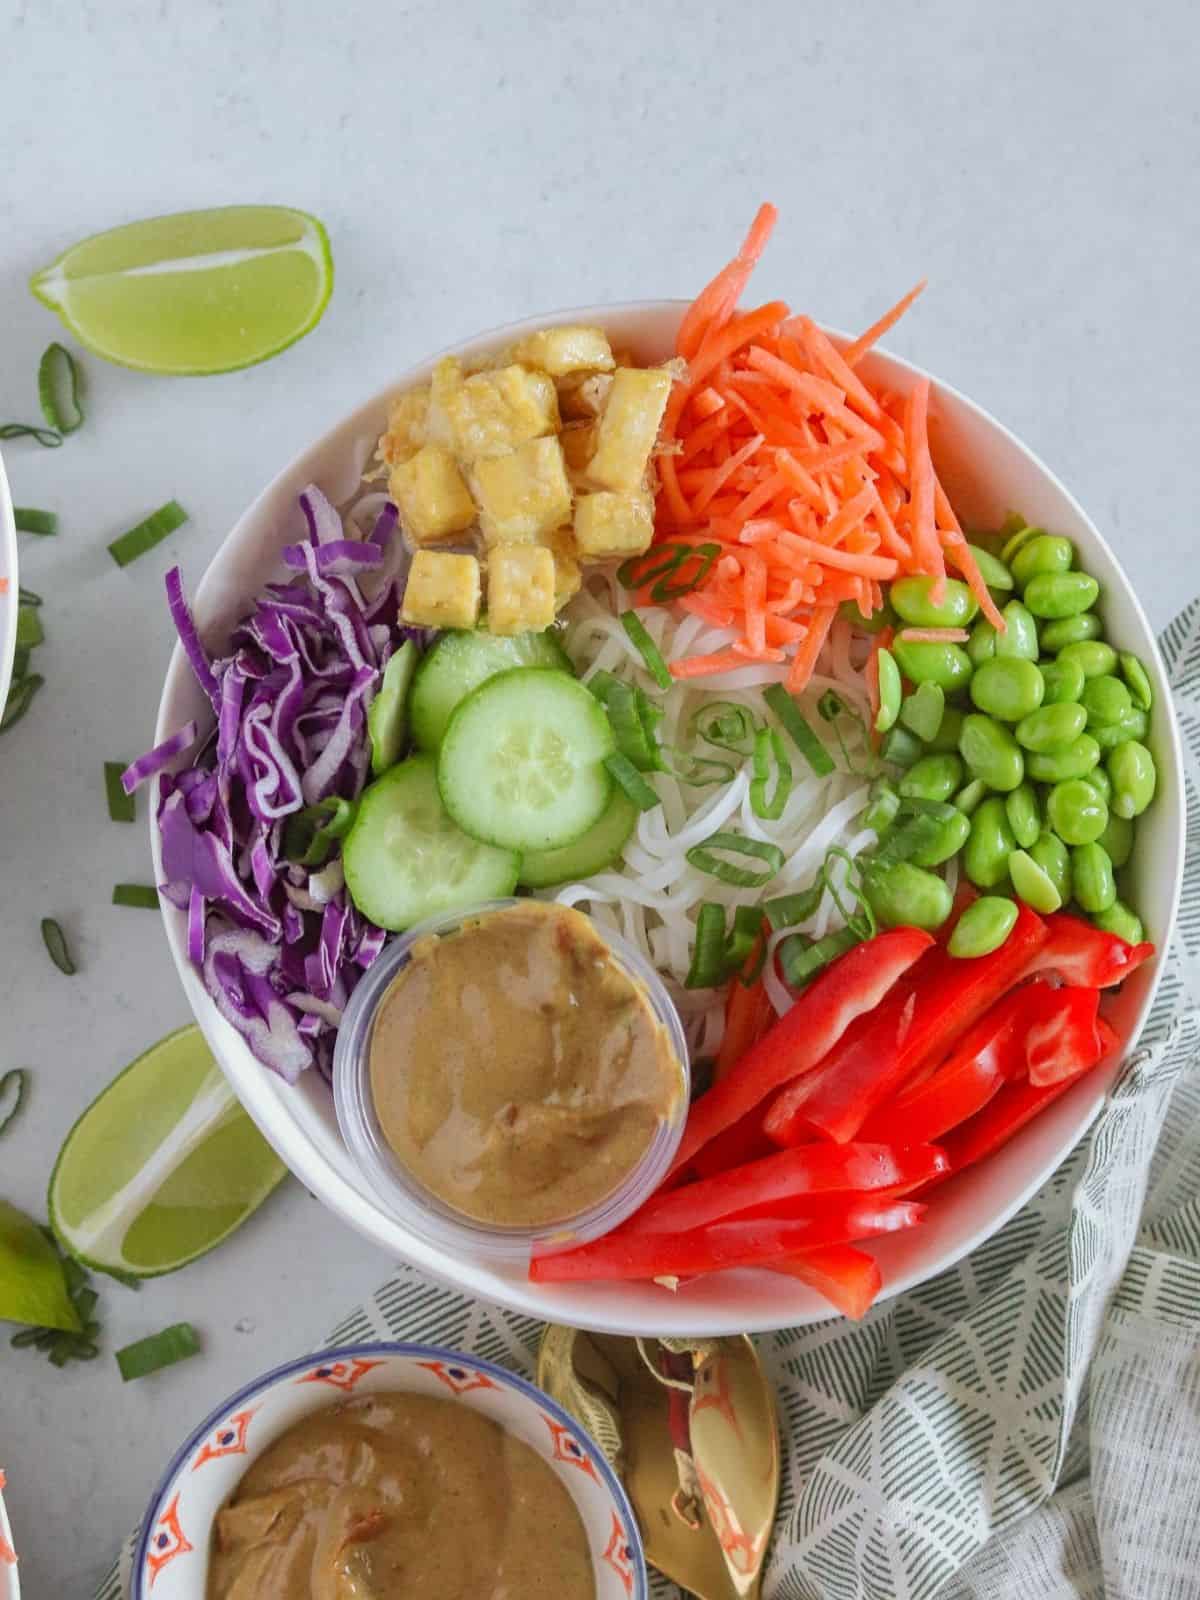 Colorful bowl on white counter with sliced limes and green onions